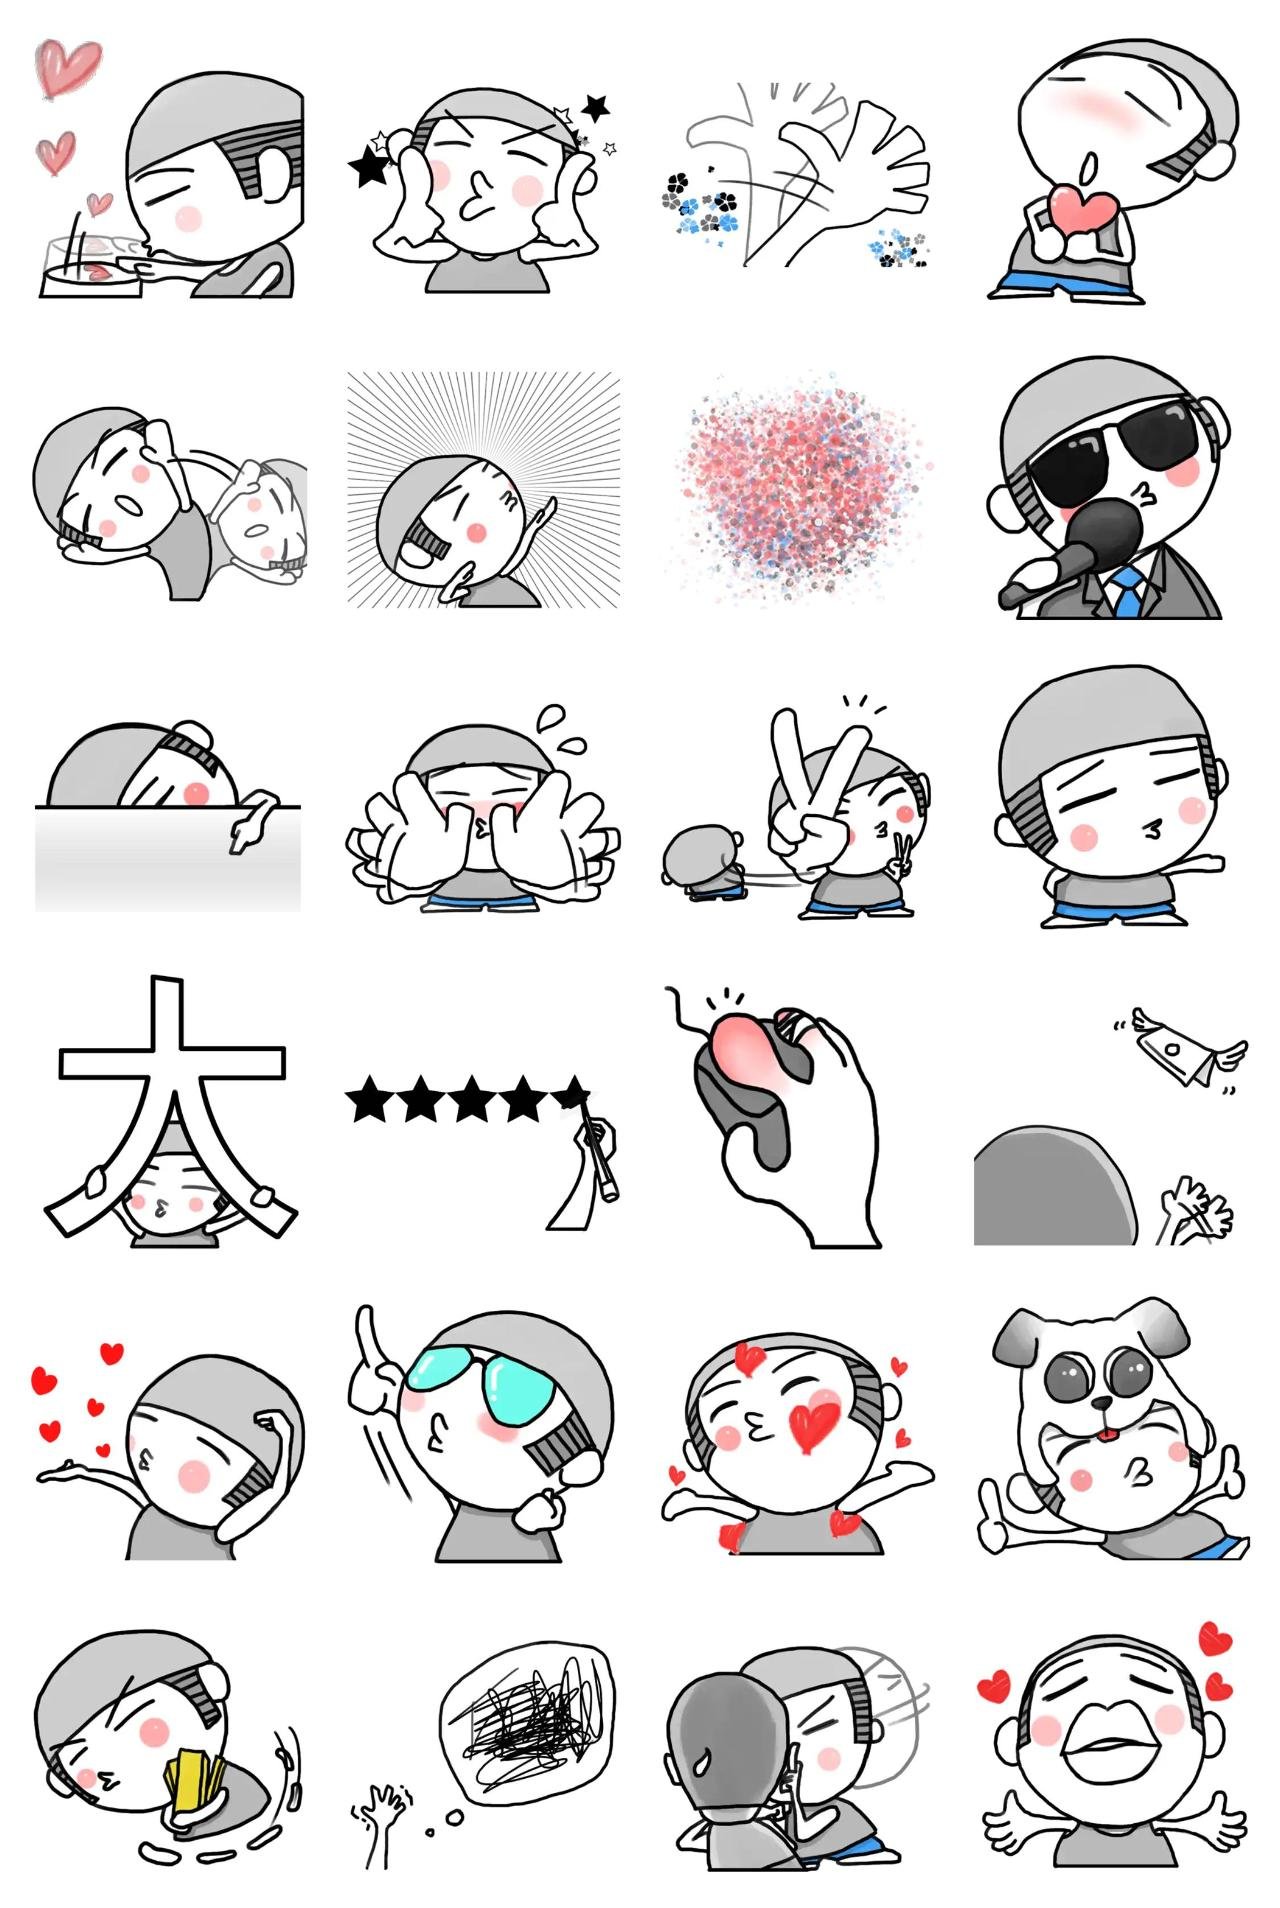 Naroo sticker People,Etc. sticker pack for Whatsapp, Telegram, Signal, and others chatting and message apps